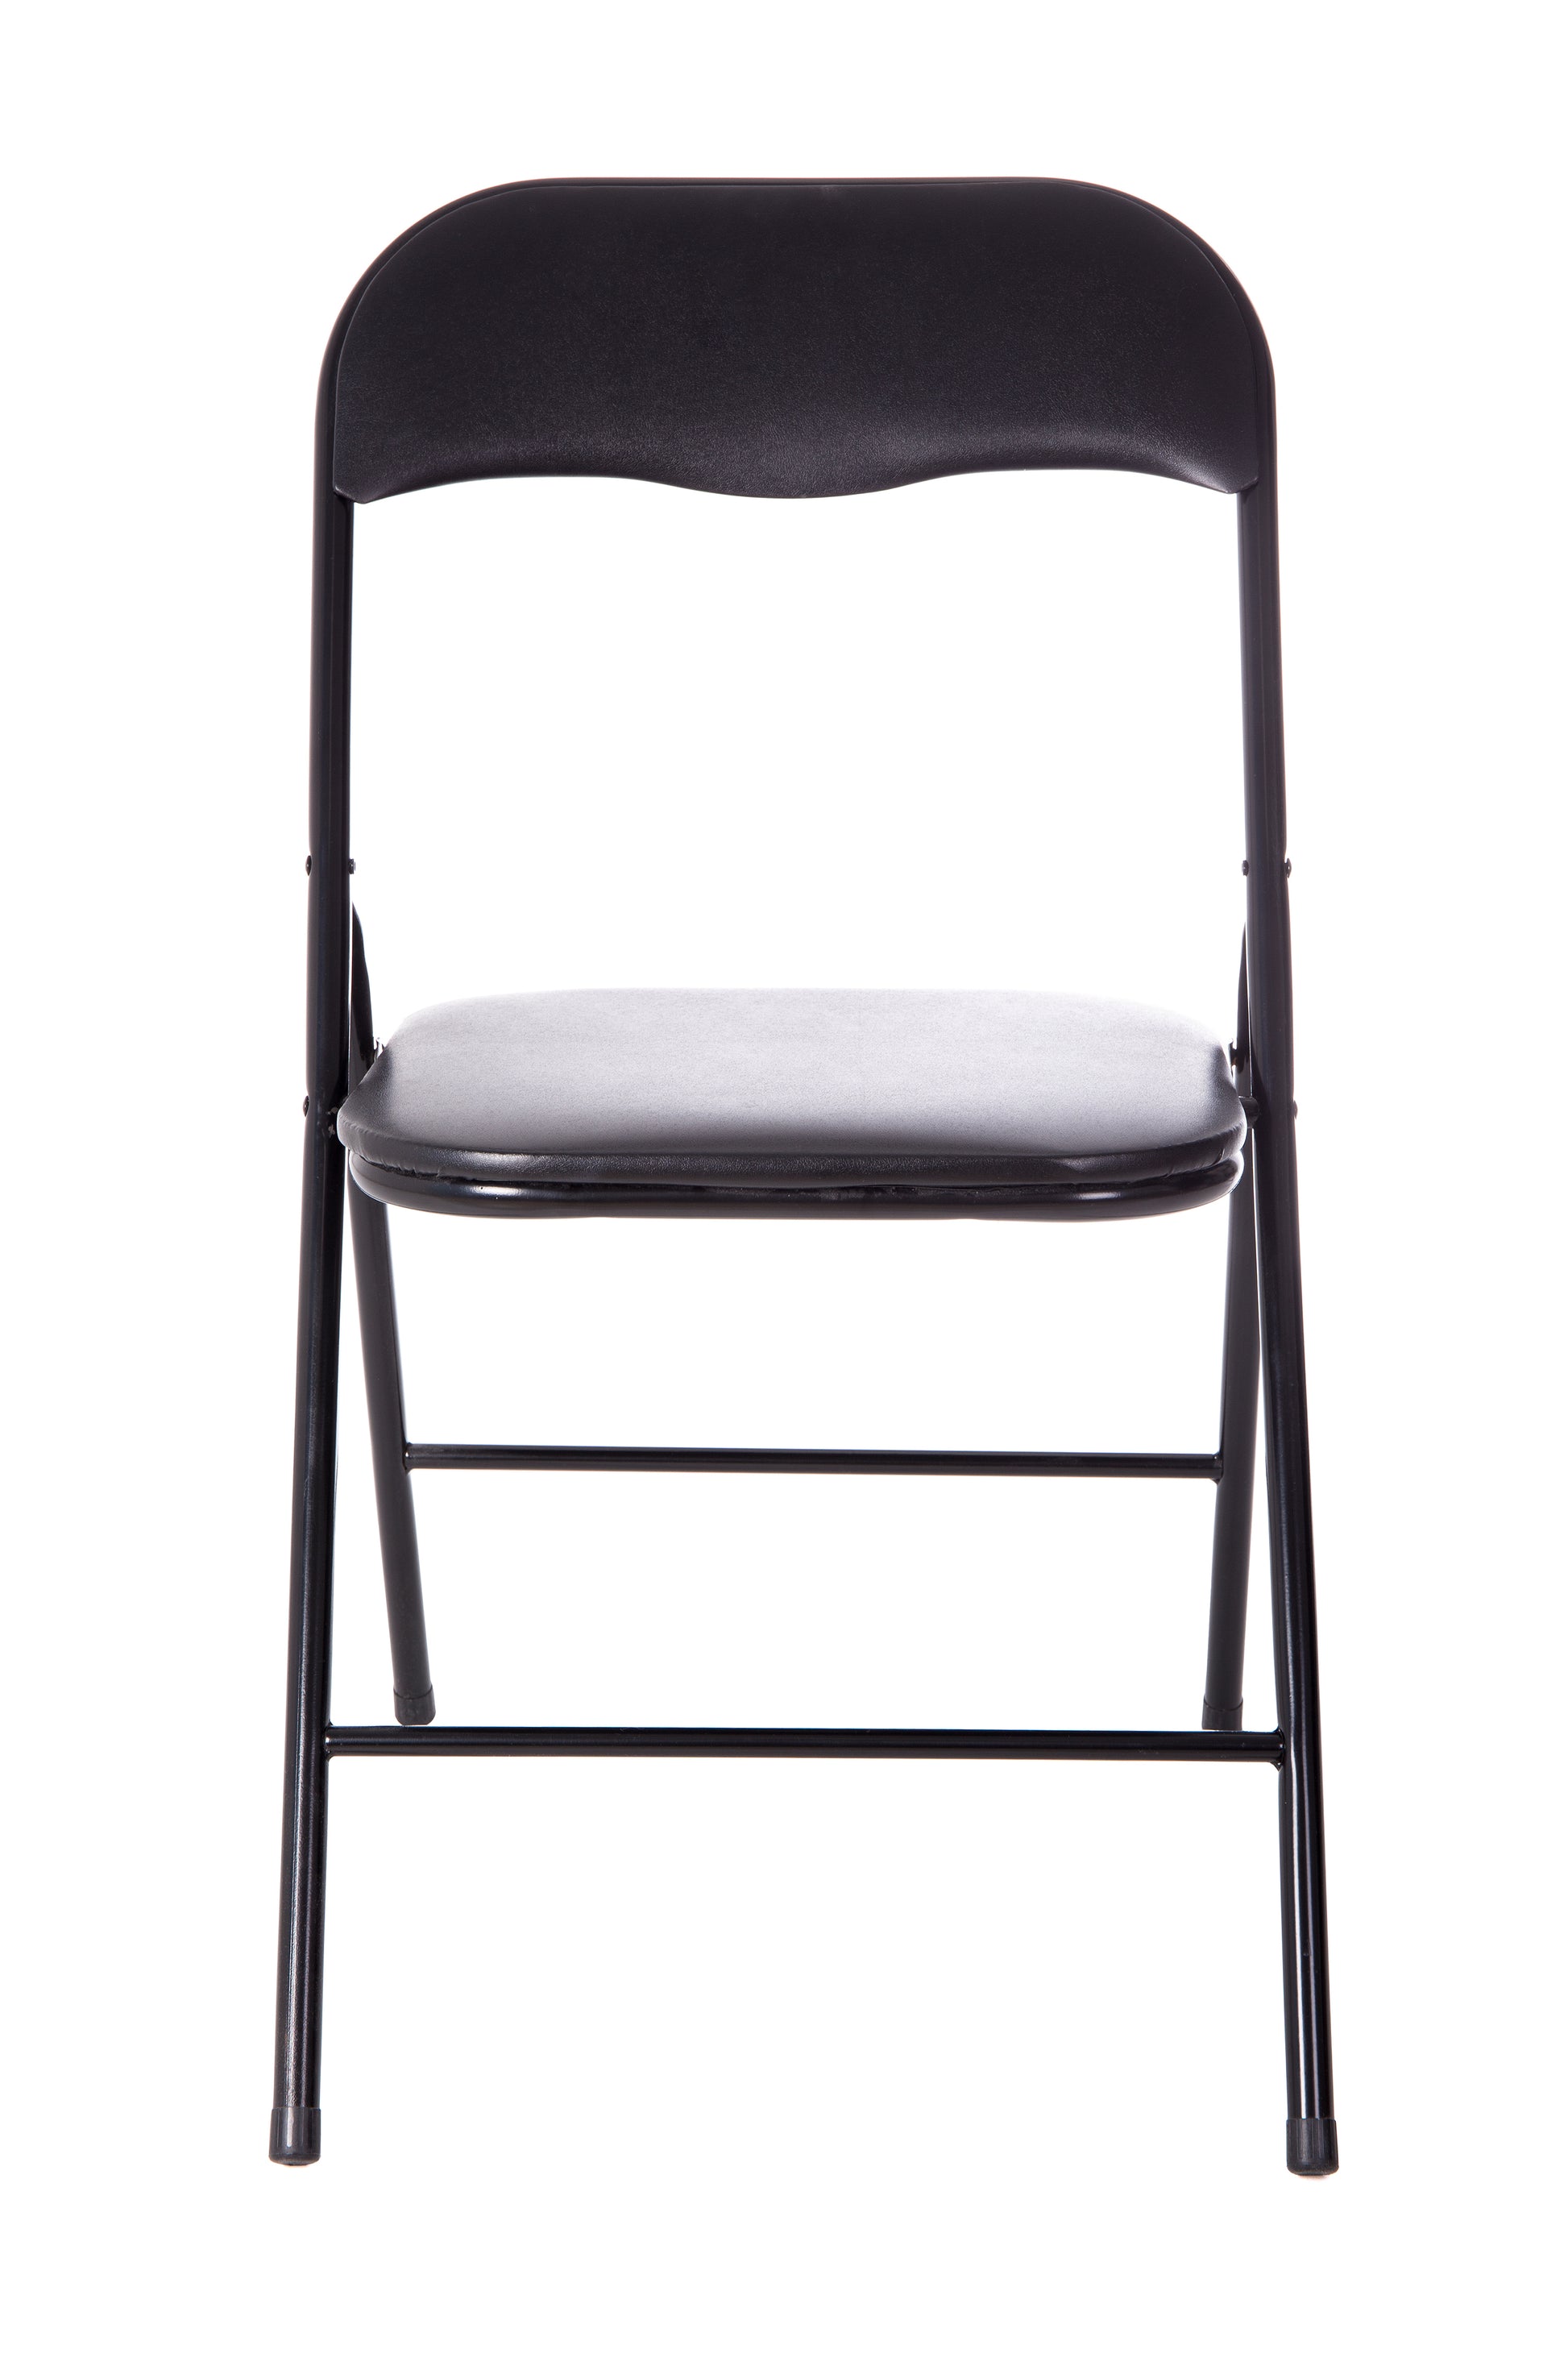 A black metal foldable chair facing frontwards.